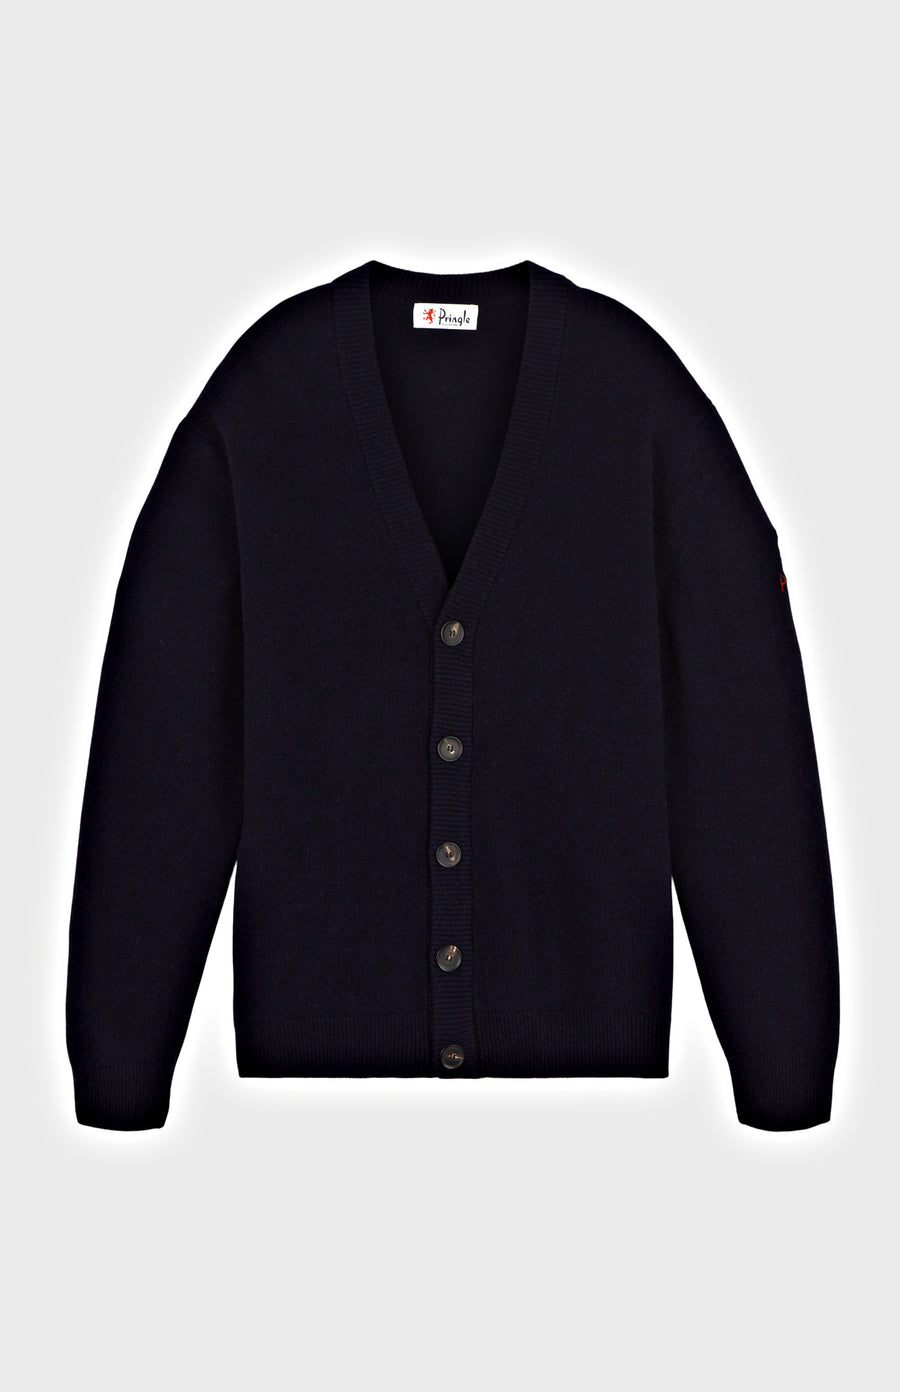 Pringle of Scotland Women's Archive Lambswool Blend Cardigan in Navy